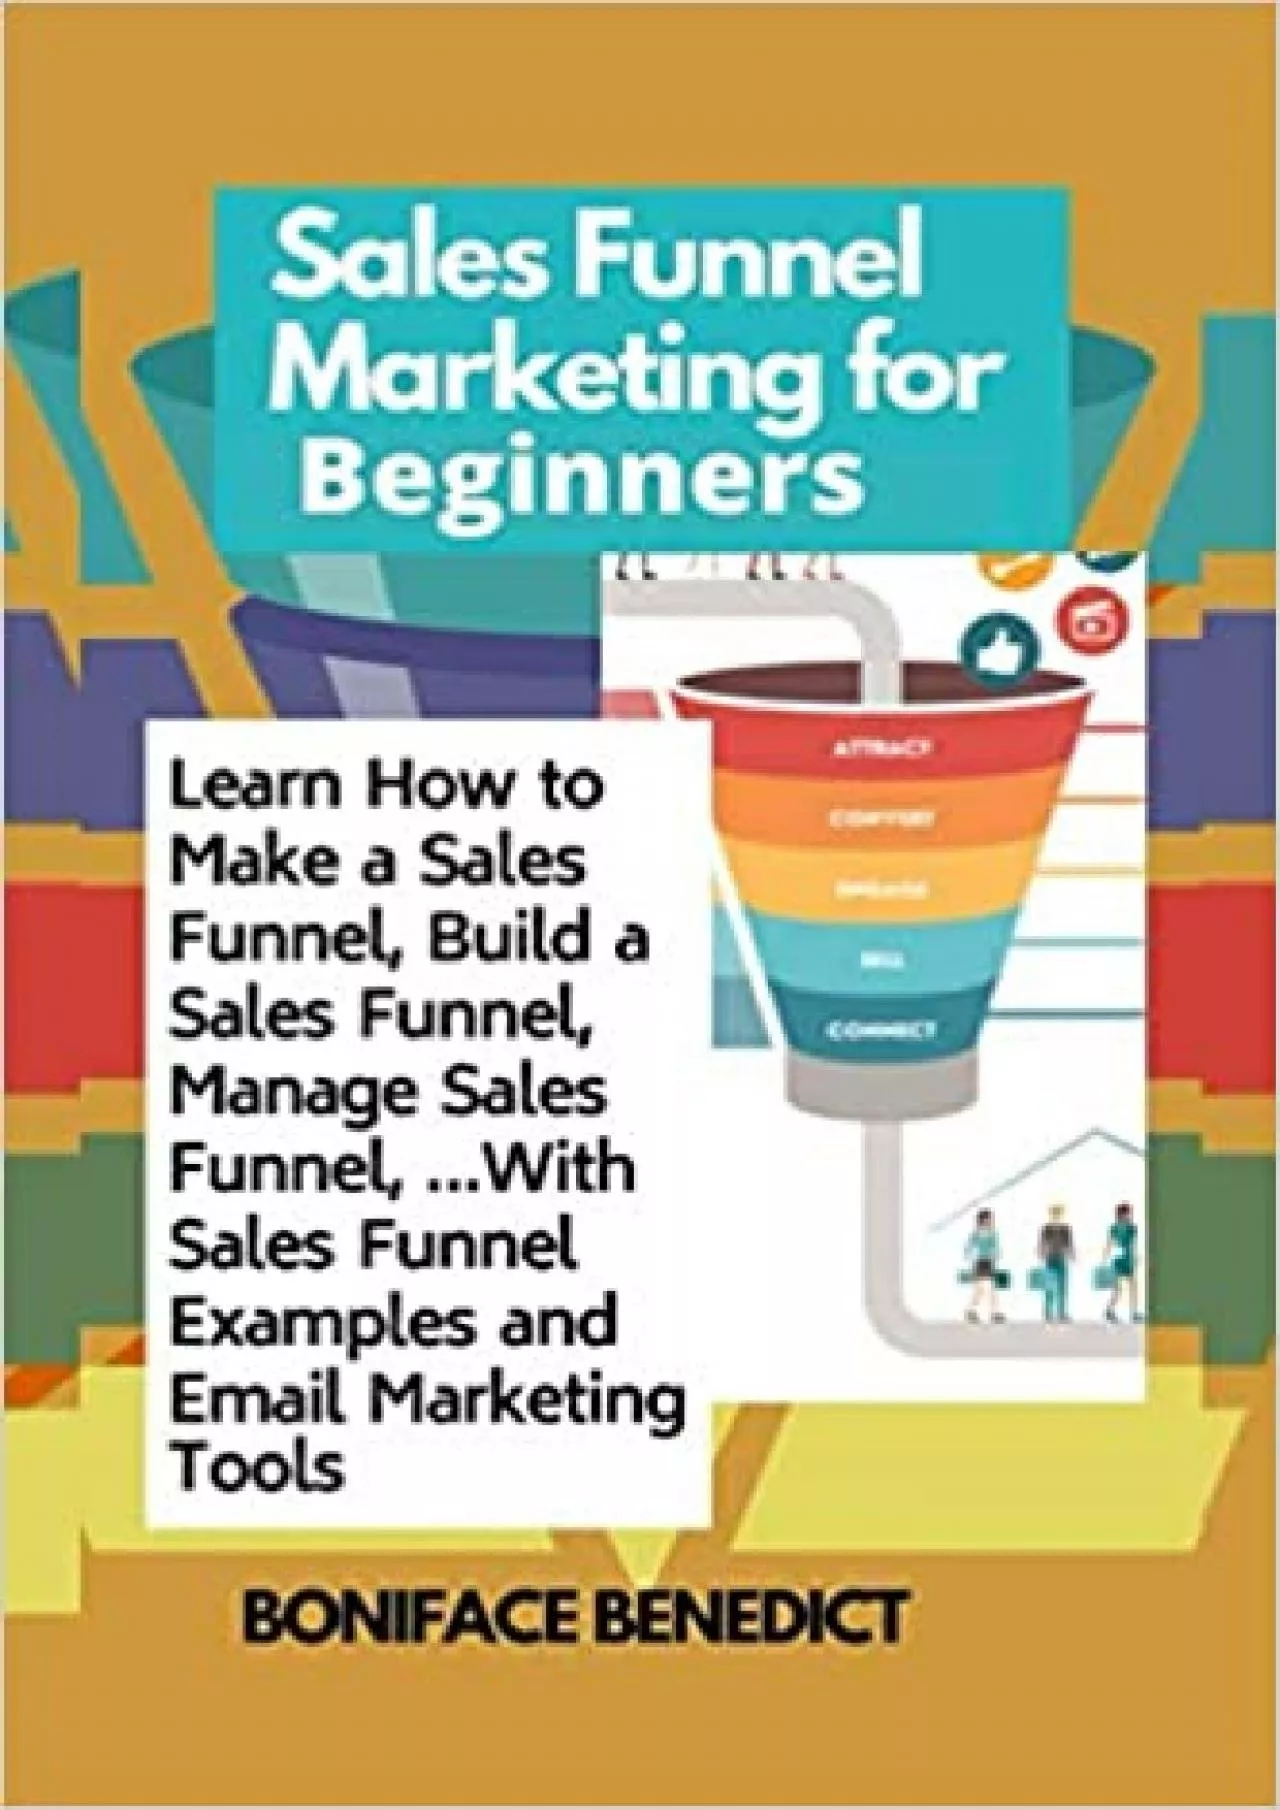 Sales Funnel Marketing for Beginners Learn How to Make a Sales Funnel, Build a Sales Funnel,